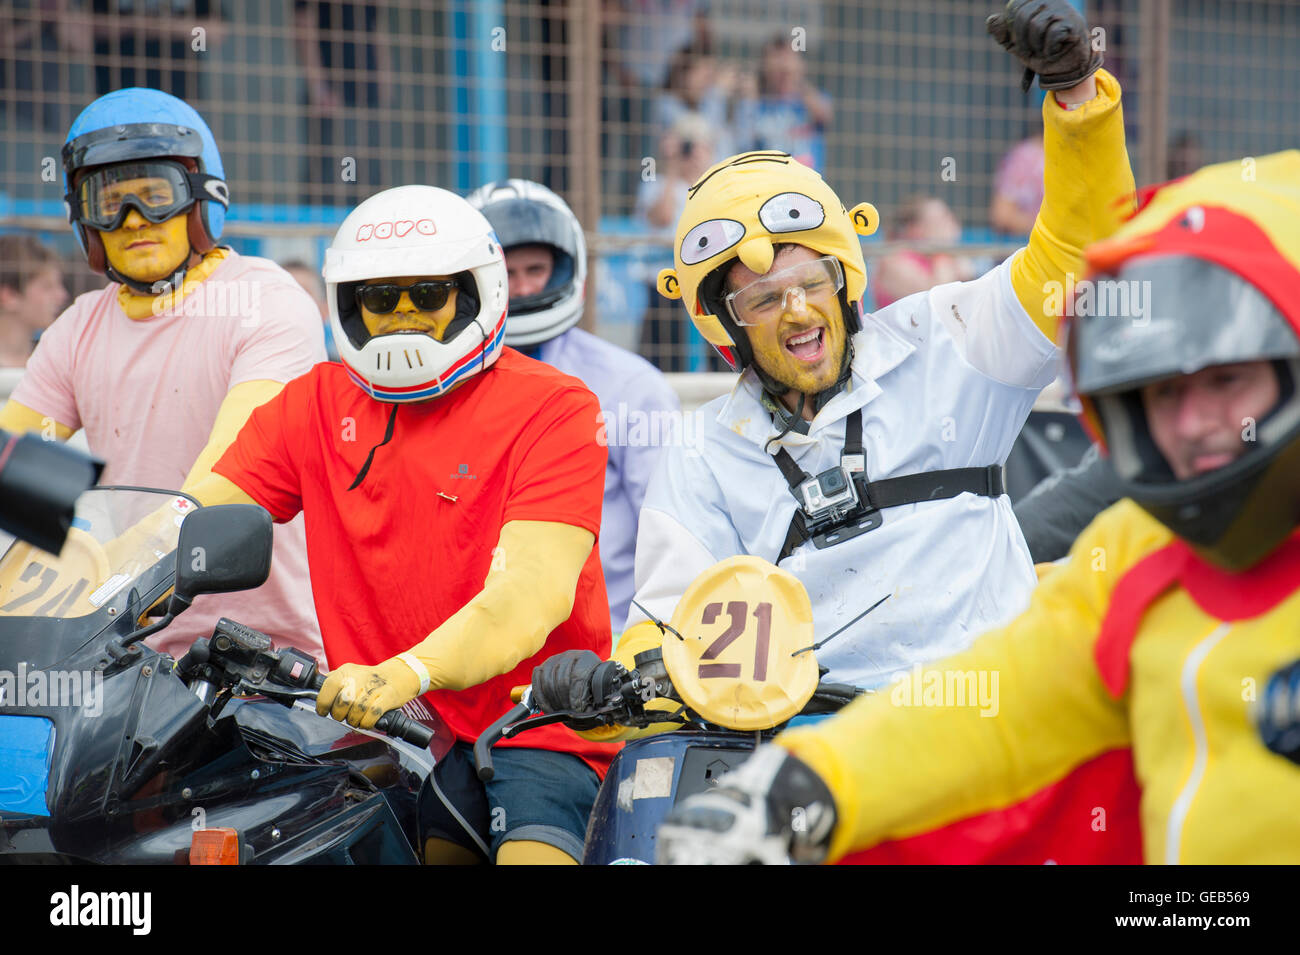 Kings Lynn, Norfolk, United Kingdom. 16.07.2016. Fifth annual Dirt Quake festival with Guy Martin and Carl 'Foggy' Fogarty. Pictured is a racer dressed as Homer Simpson riding a Vespa scooter. Stock Photo